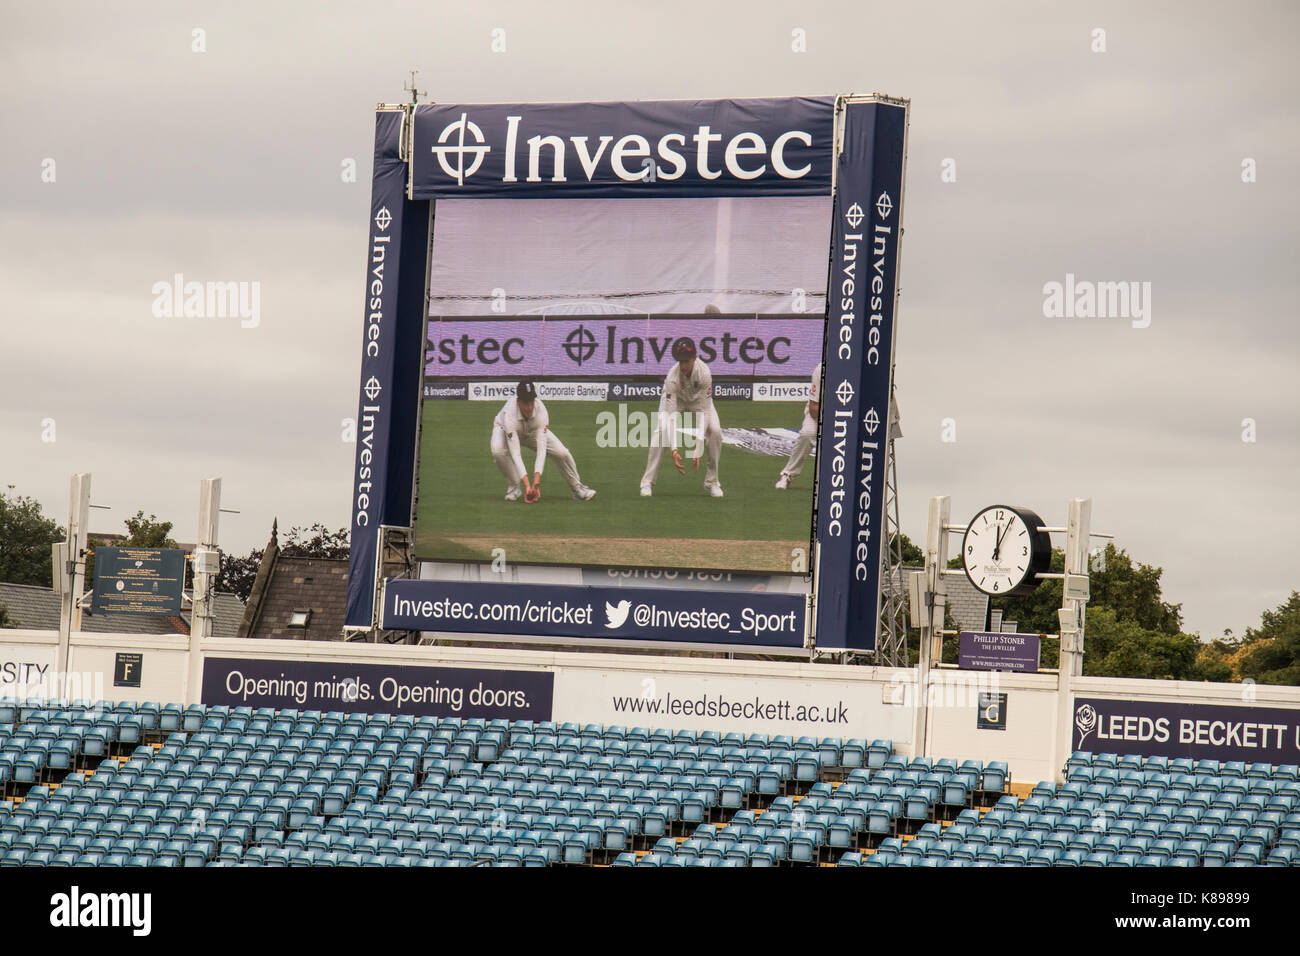 The Electronic video replay board at Headingley Cricket Ground, Leeds, showing  England players and Investec - the sponsors. Stock Photo